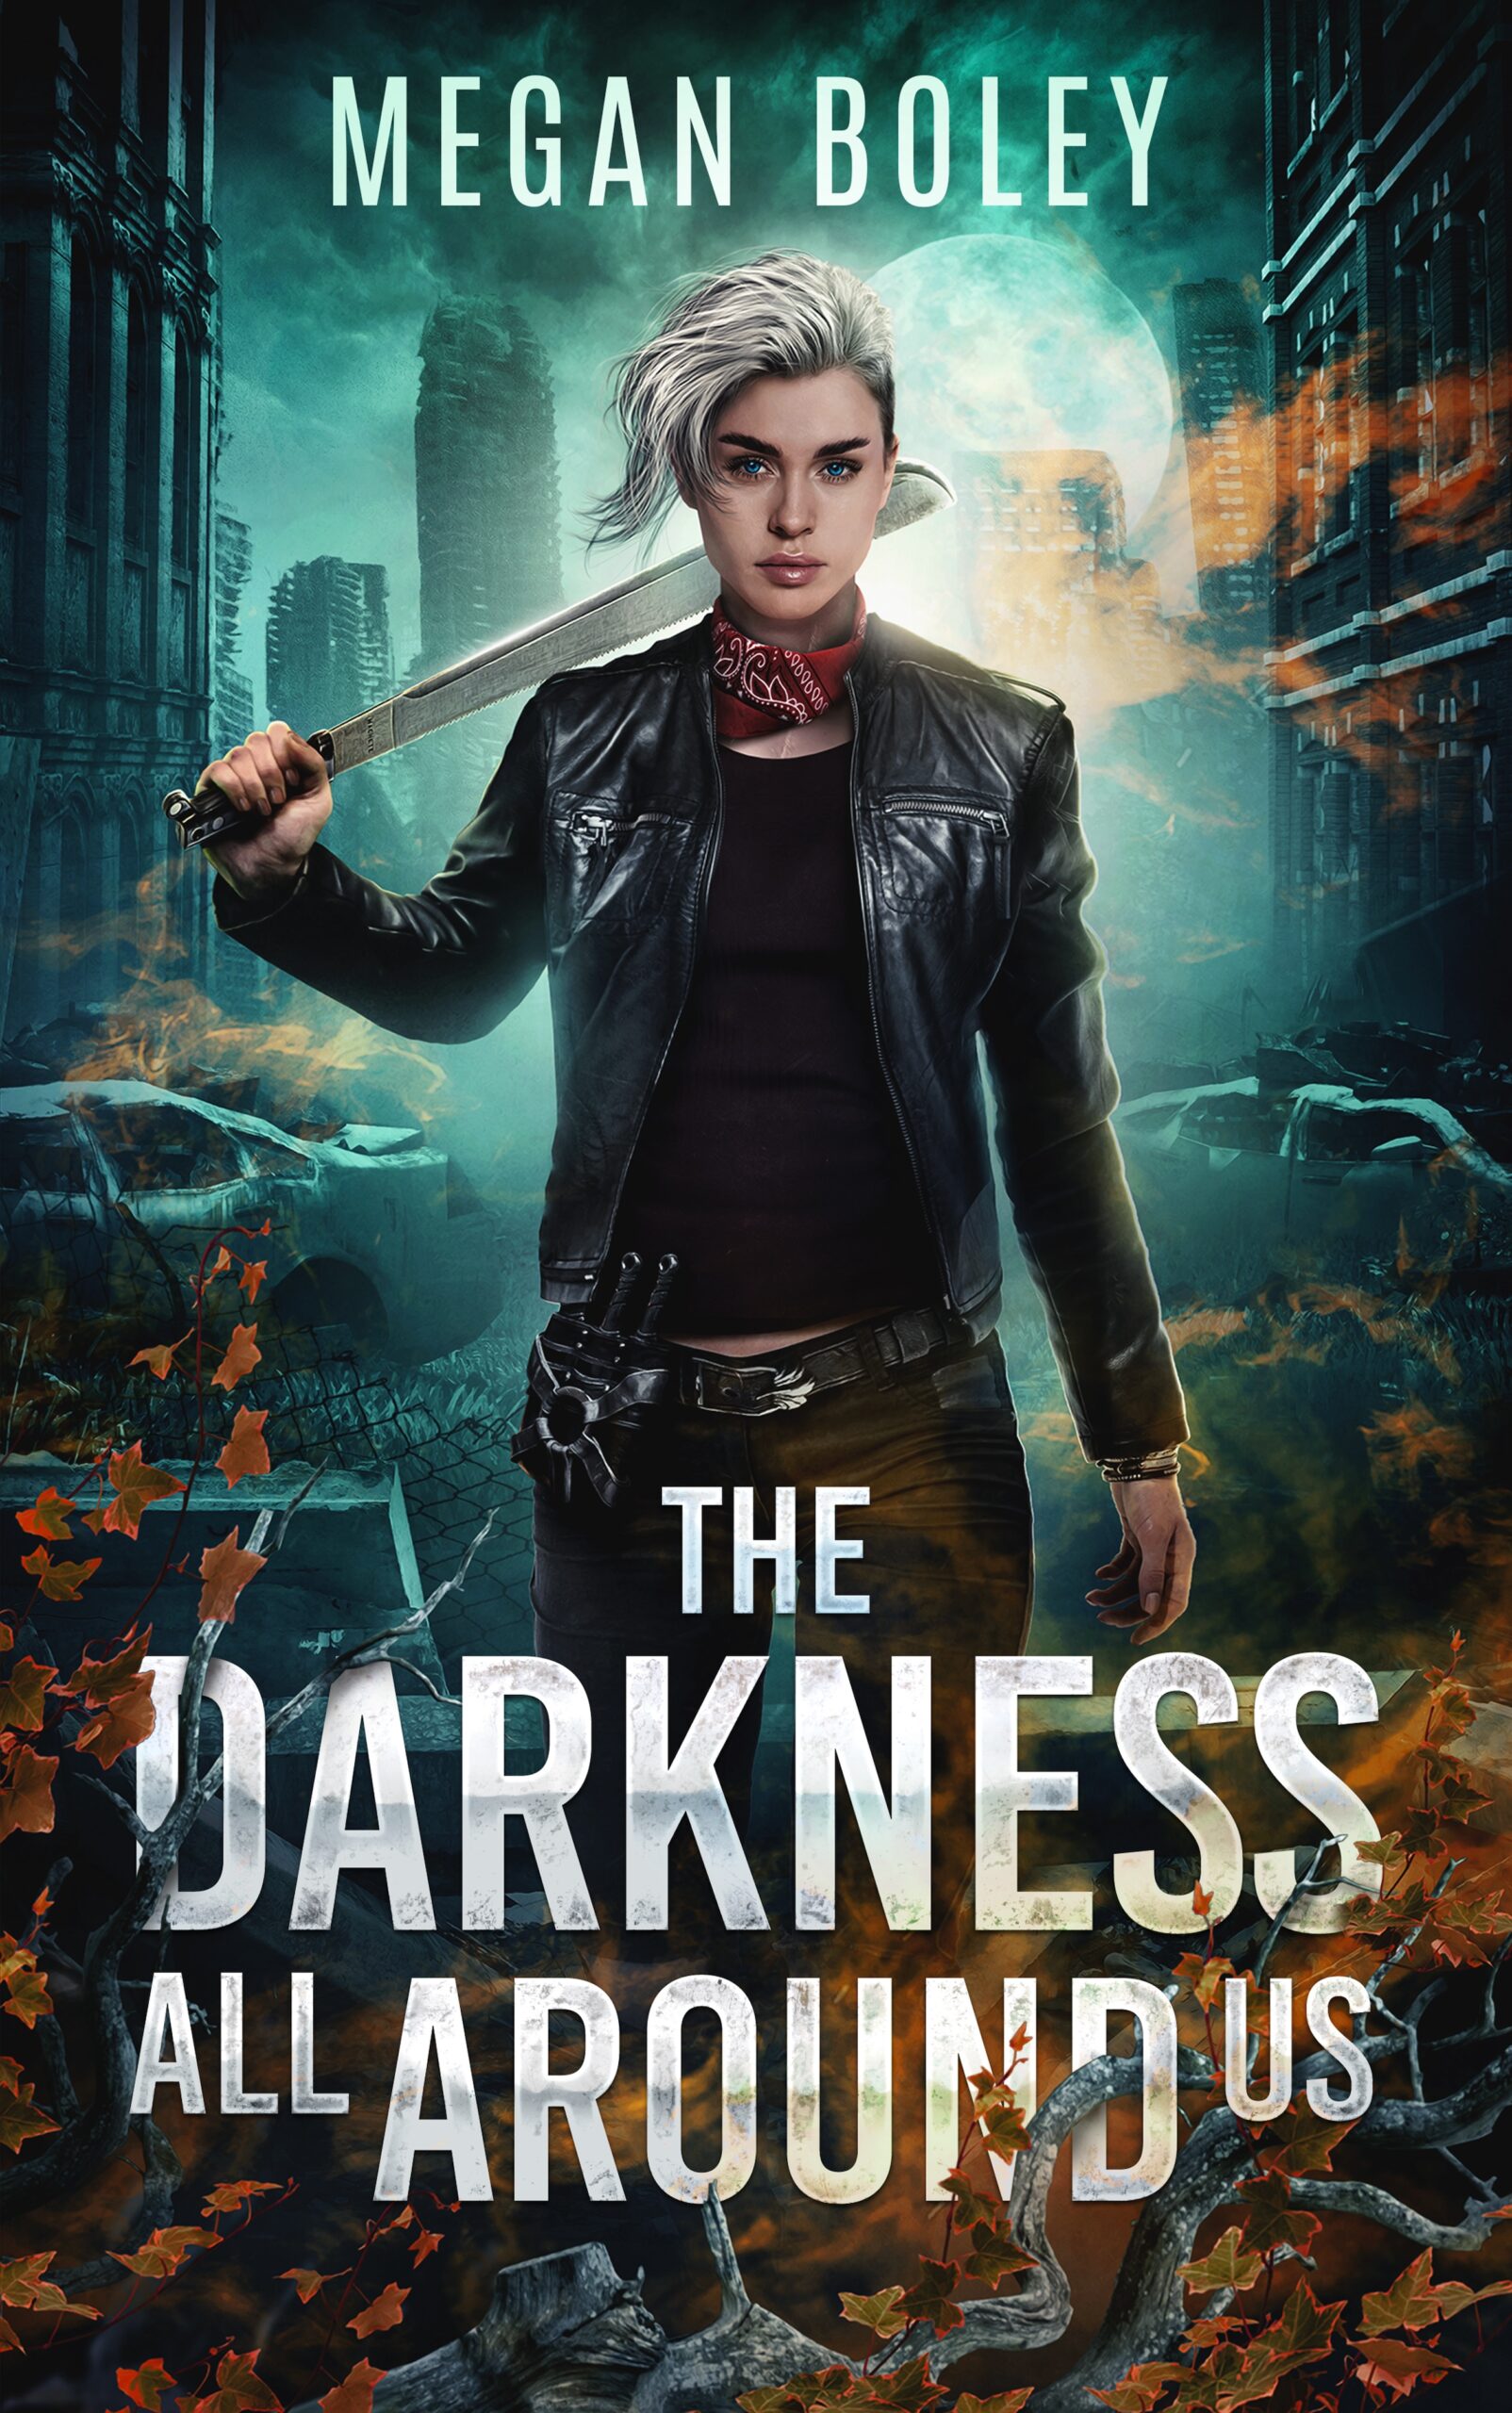 The Darkness All Around Us by Megan Boley